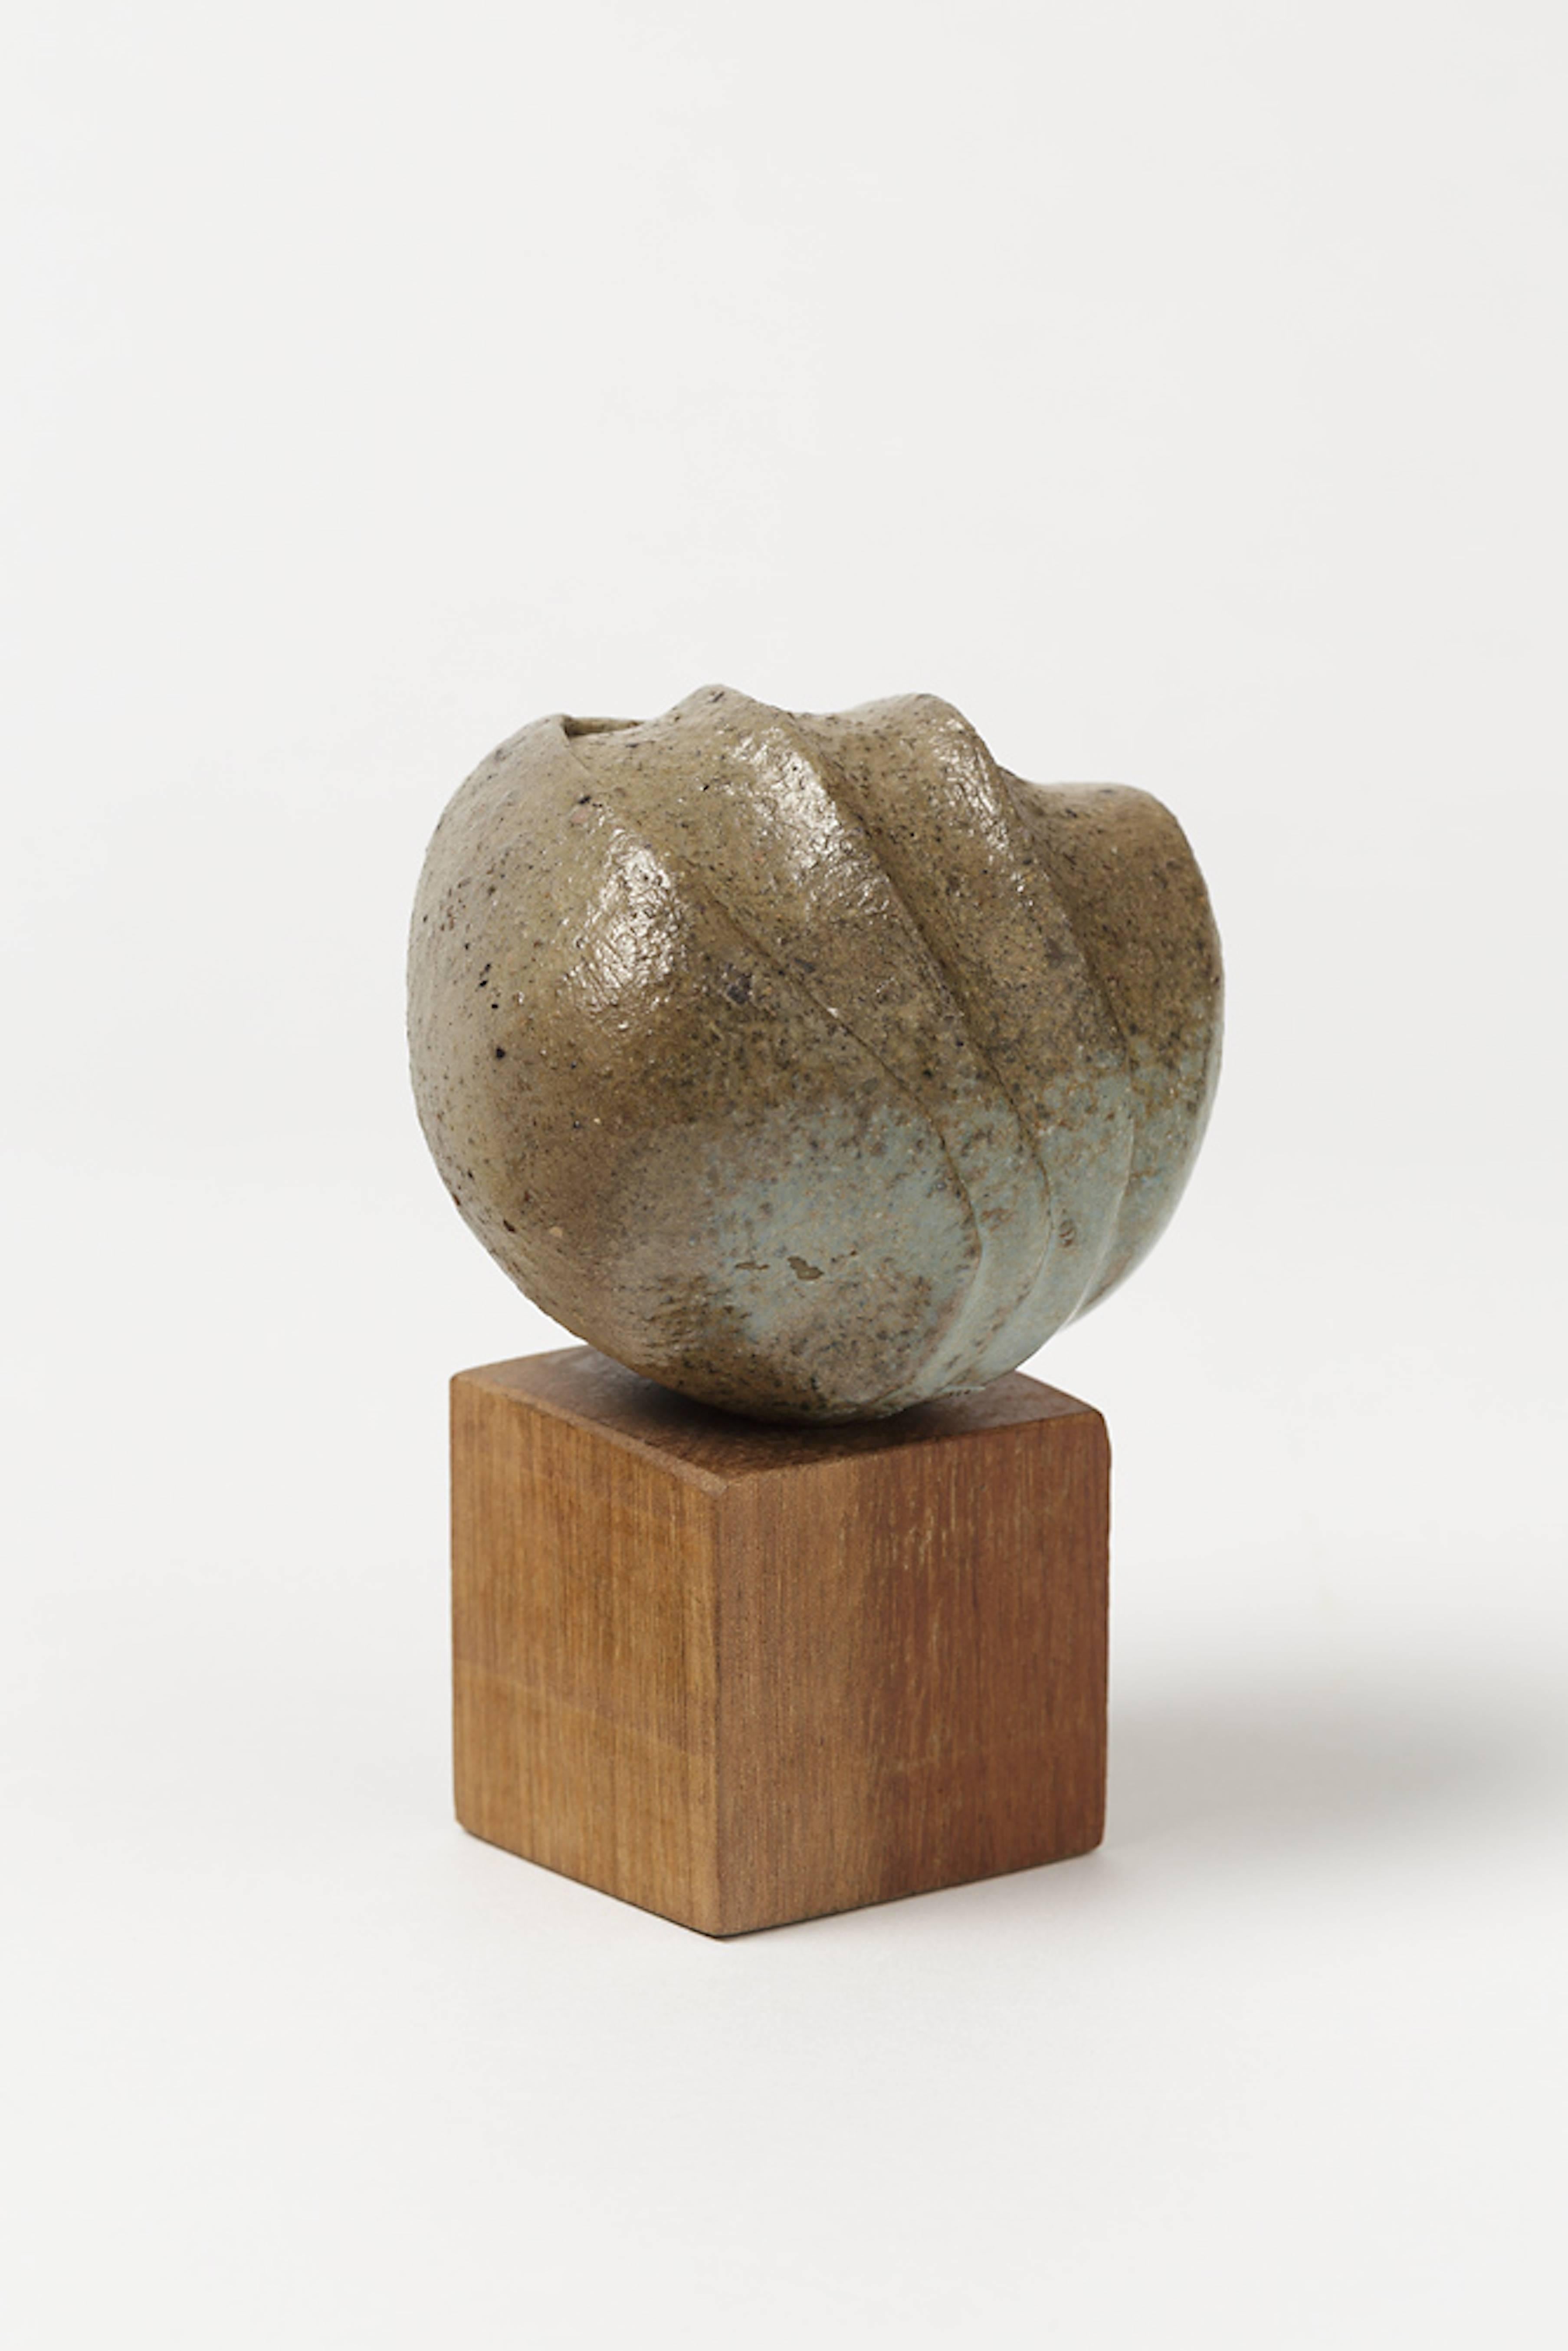 An elegant stoneware sculpture with wood base by Elisabeth Joulia.
Unique piece.
Signed “Joulia” and dated “81” (1981).
Dimensions include wood base.